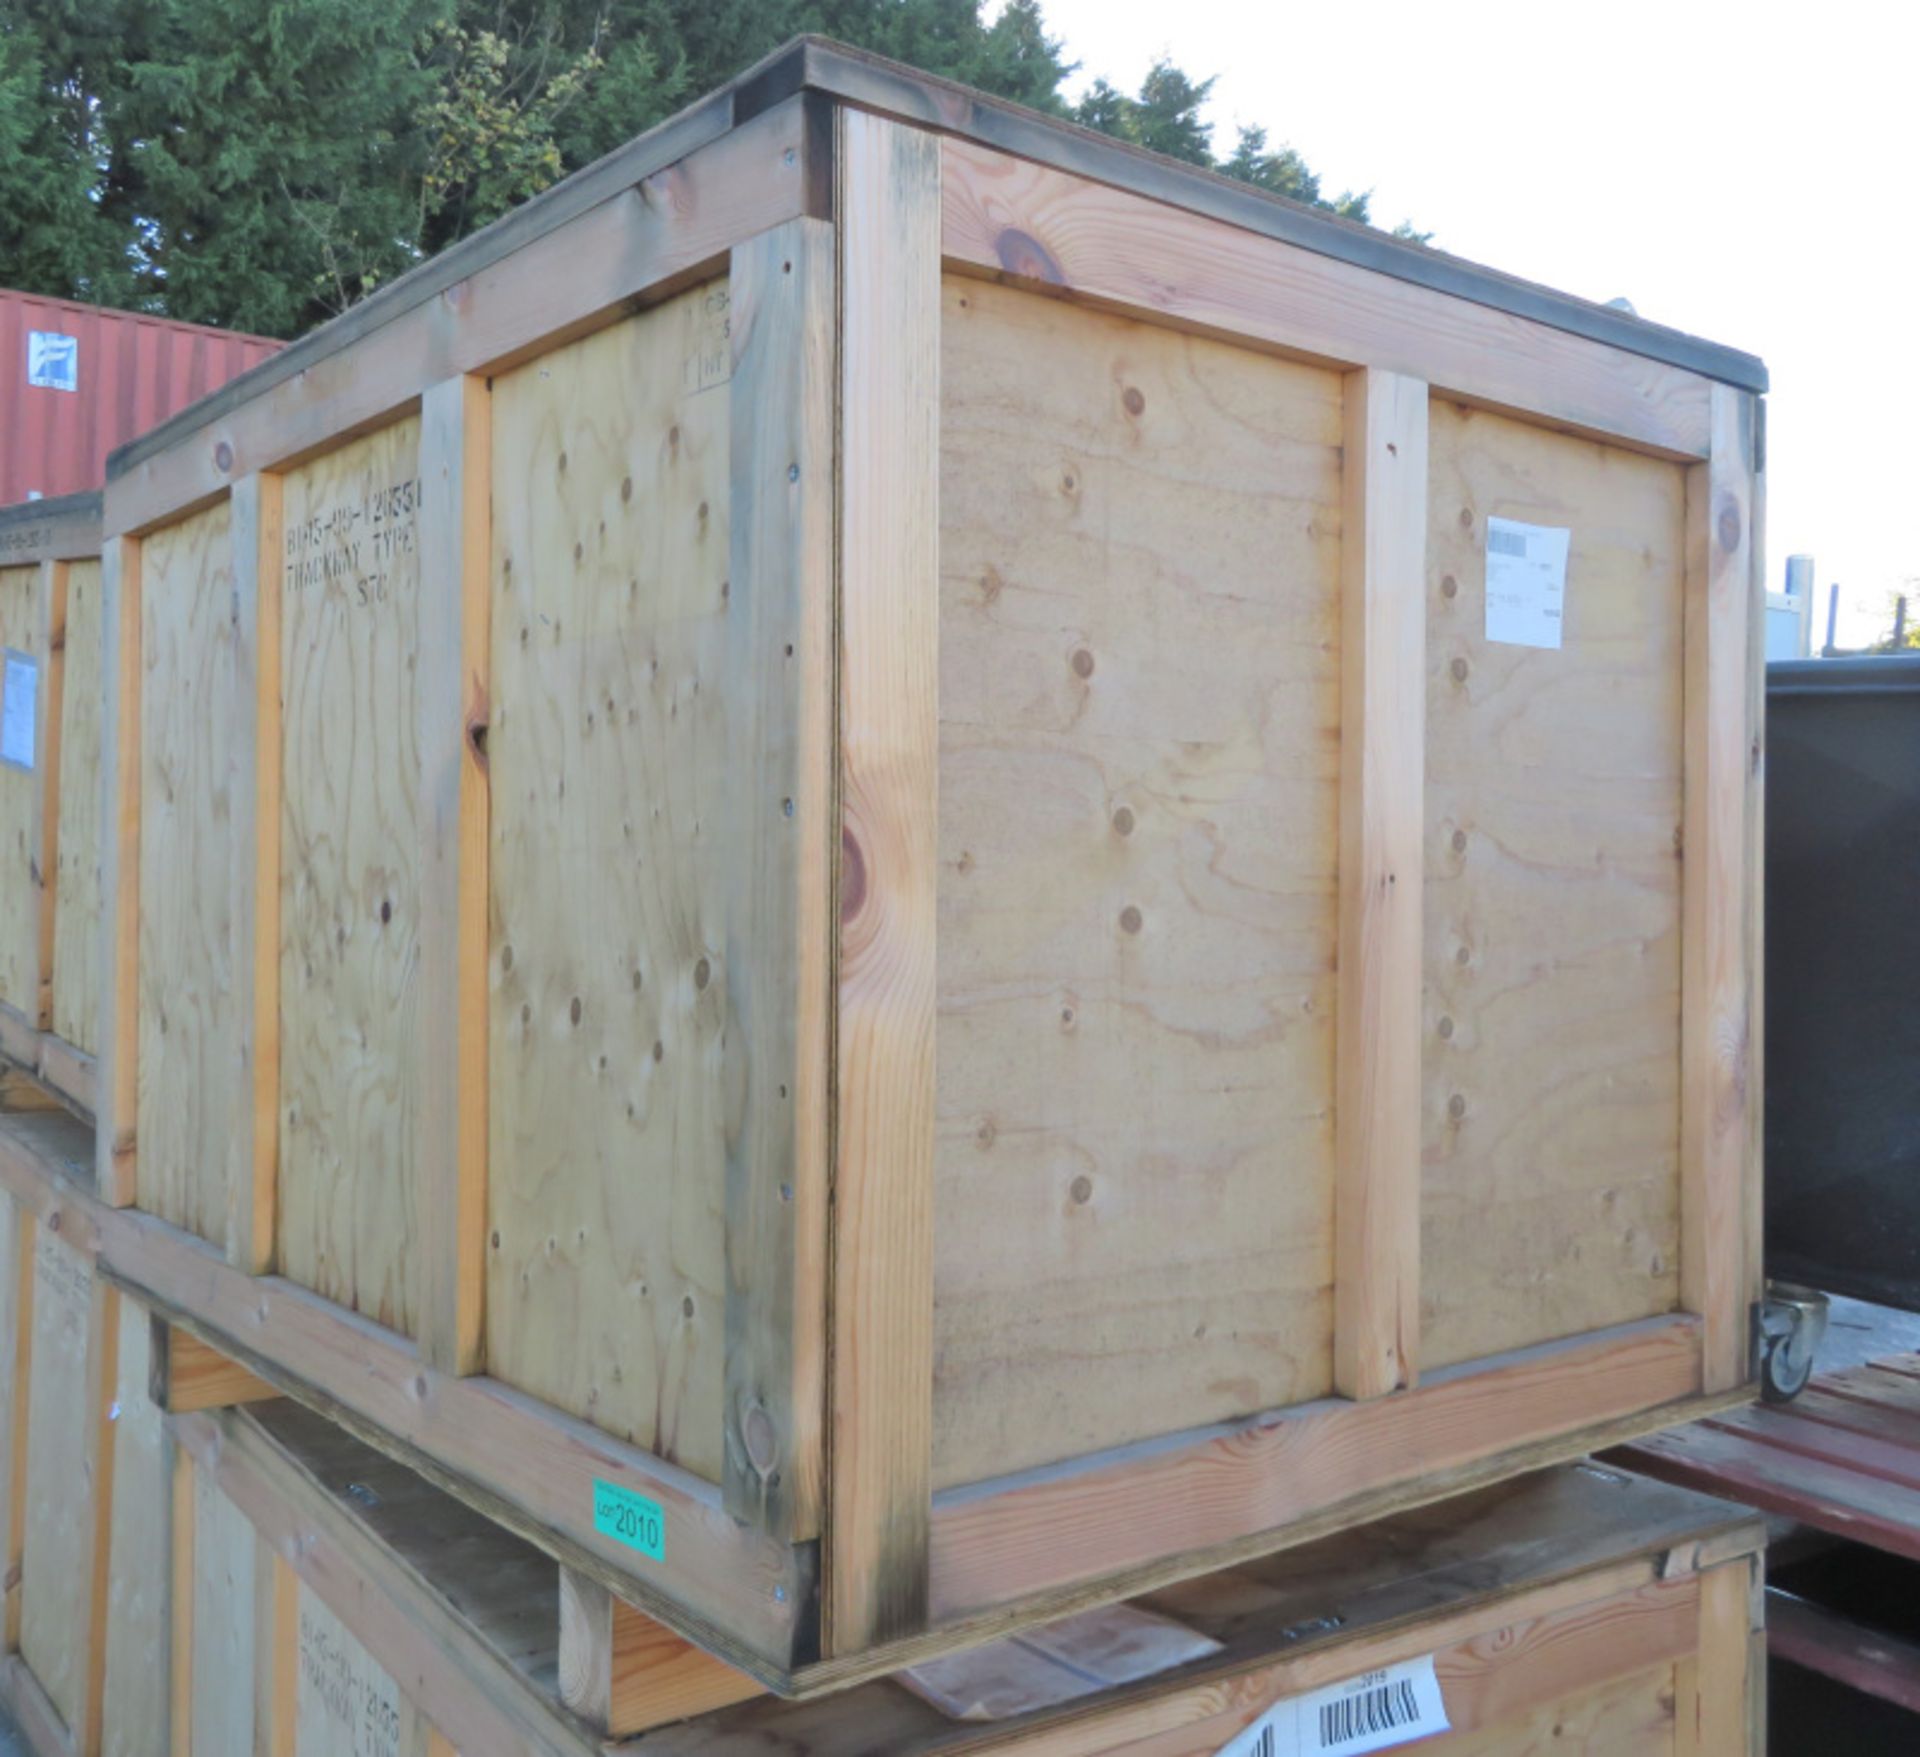 Wooden Shipping Crate L 1400mm x D 1100mnm x H 1050mm - Image 2 of 2